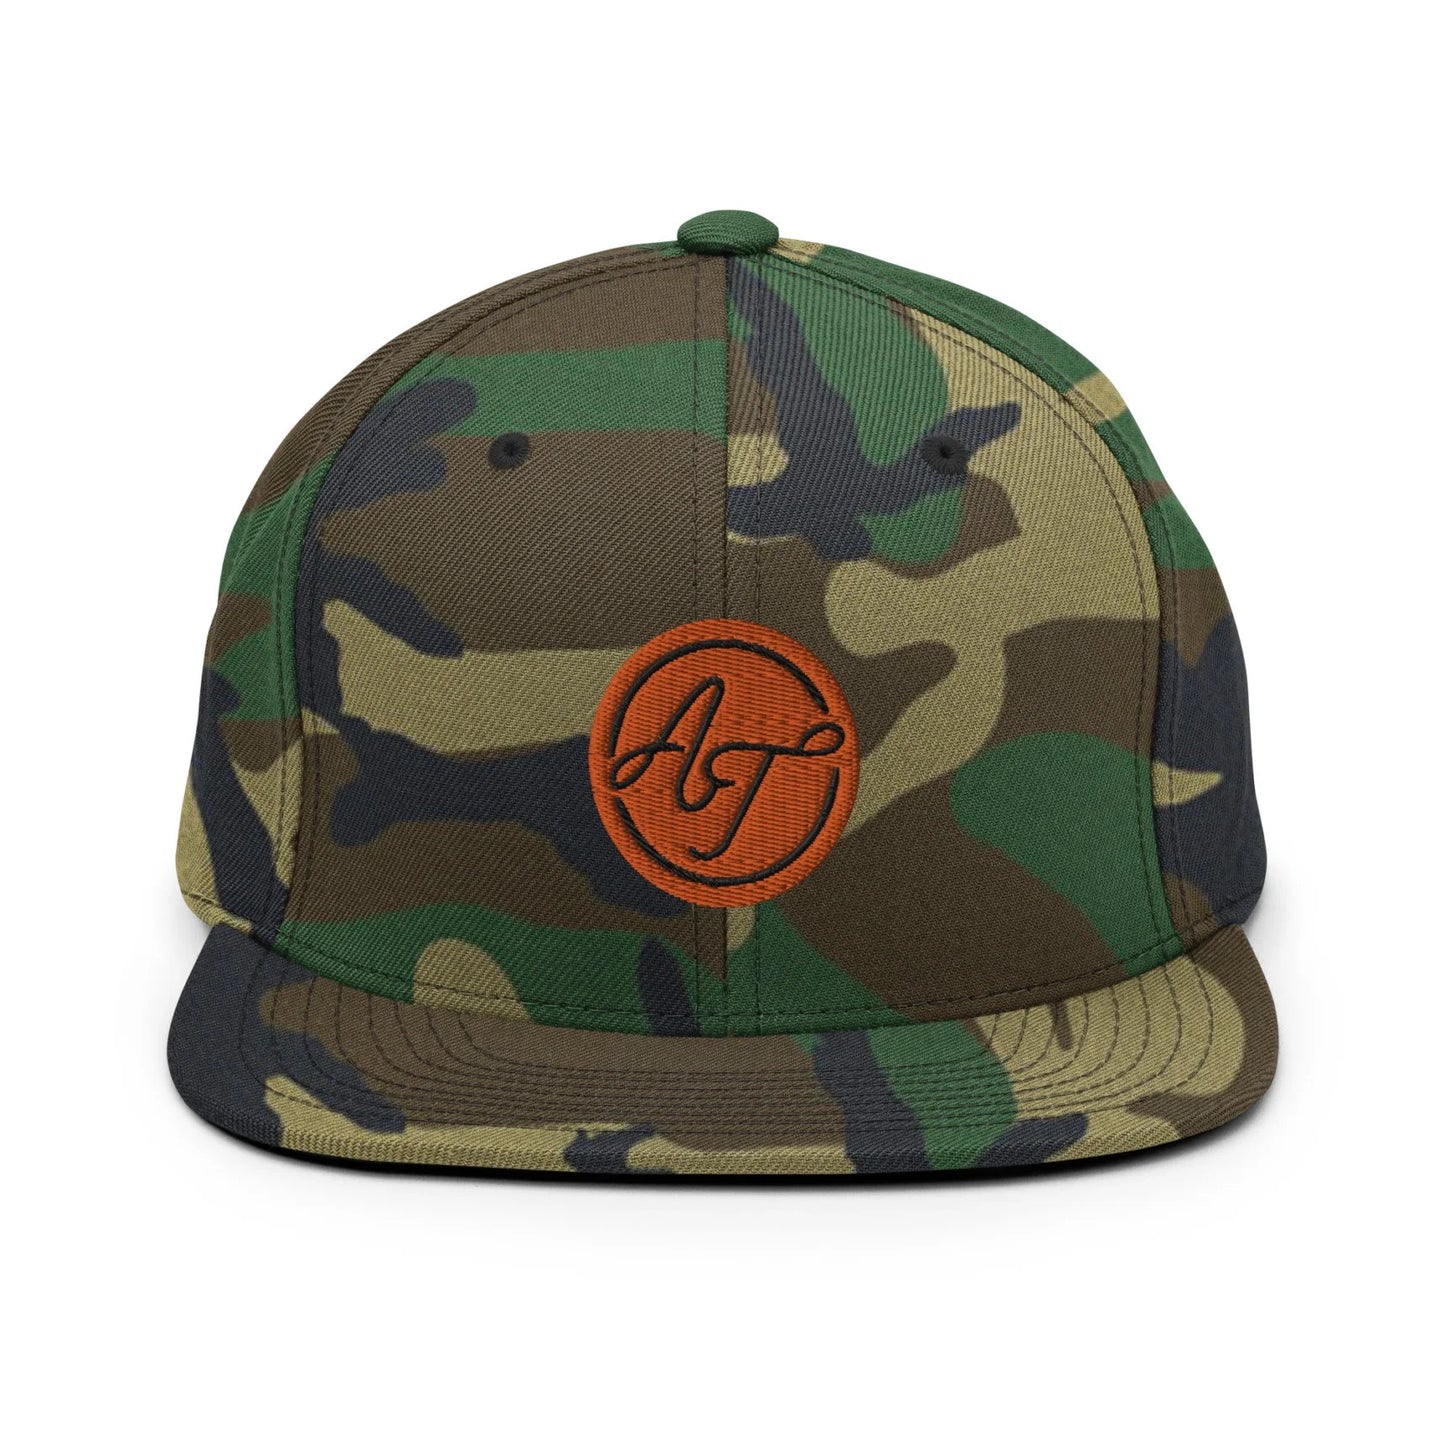 Thuuuuney ShowZone snapback hat in green camo camouflage